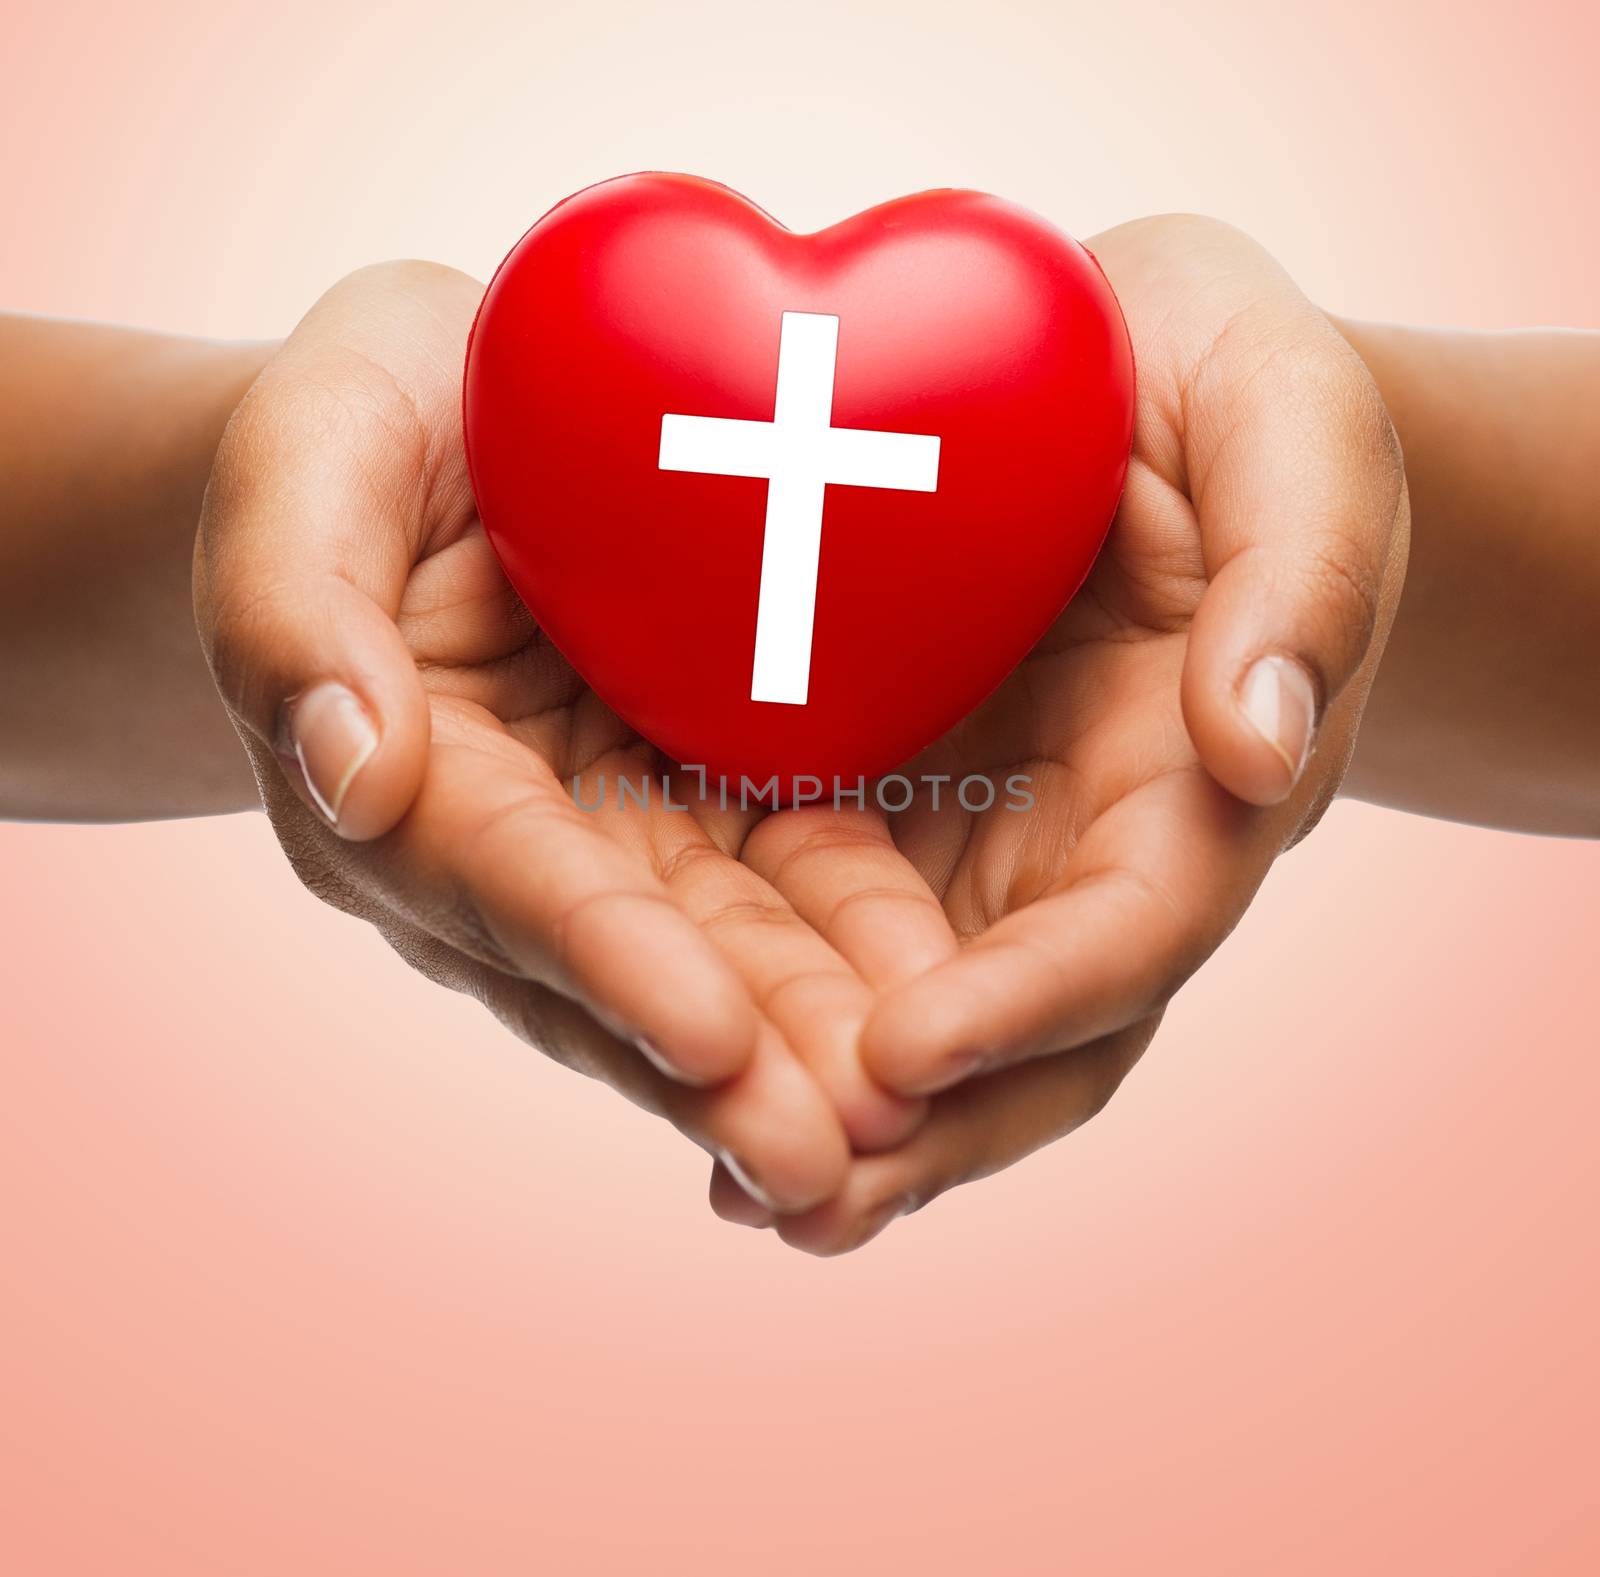 religion, christianity and charity concept - close up of female hands holding red heart with christian cross symbol over beige background